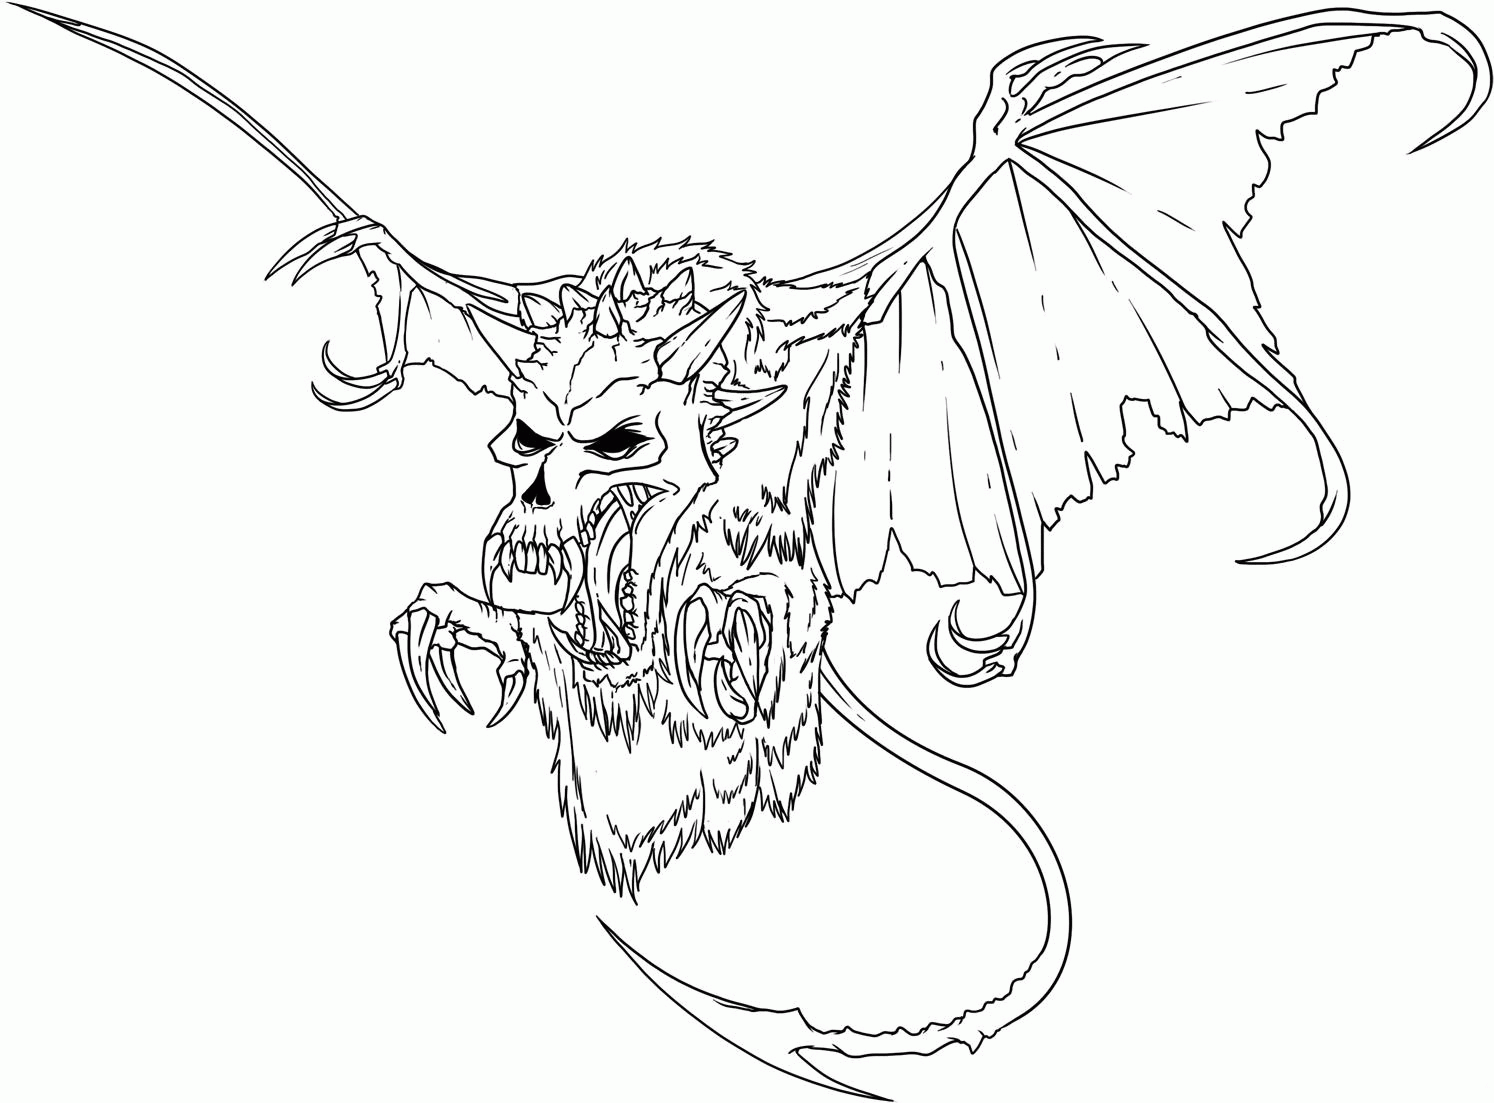 Some Amazing Evil Coloring Pages